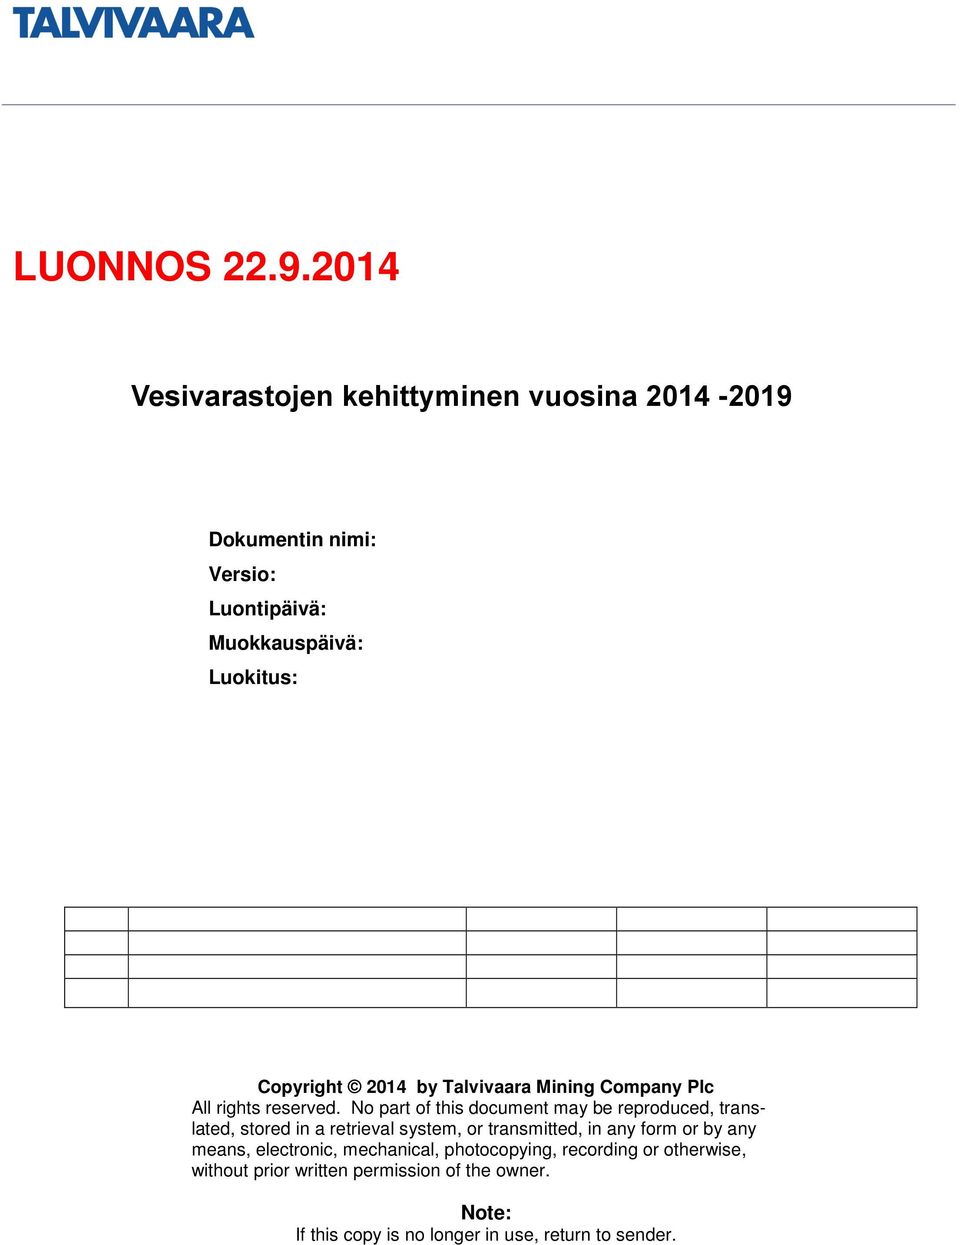 2014 by Talvivaara Mining Company Plc All rights reserved.